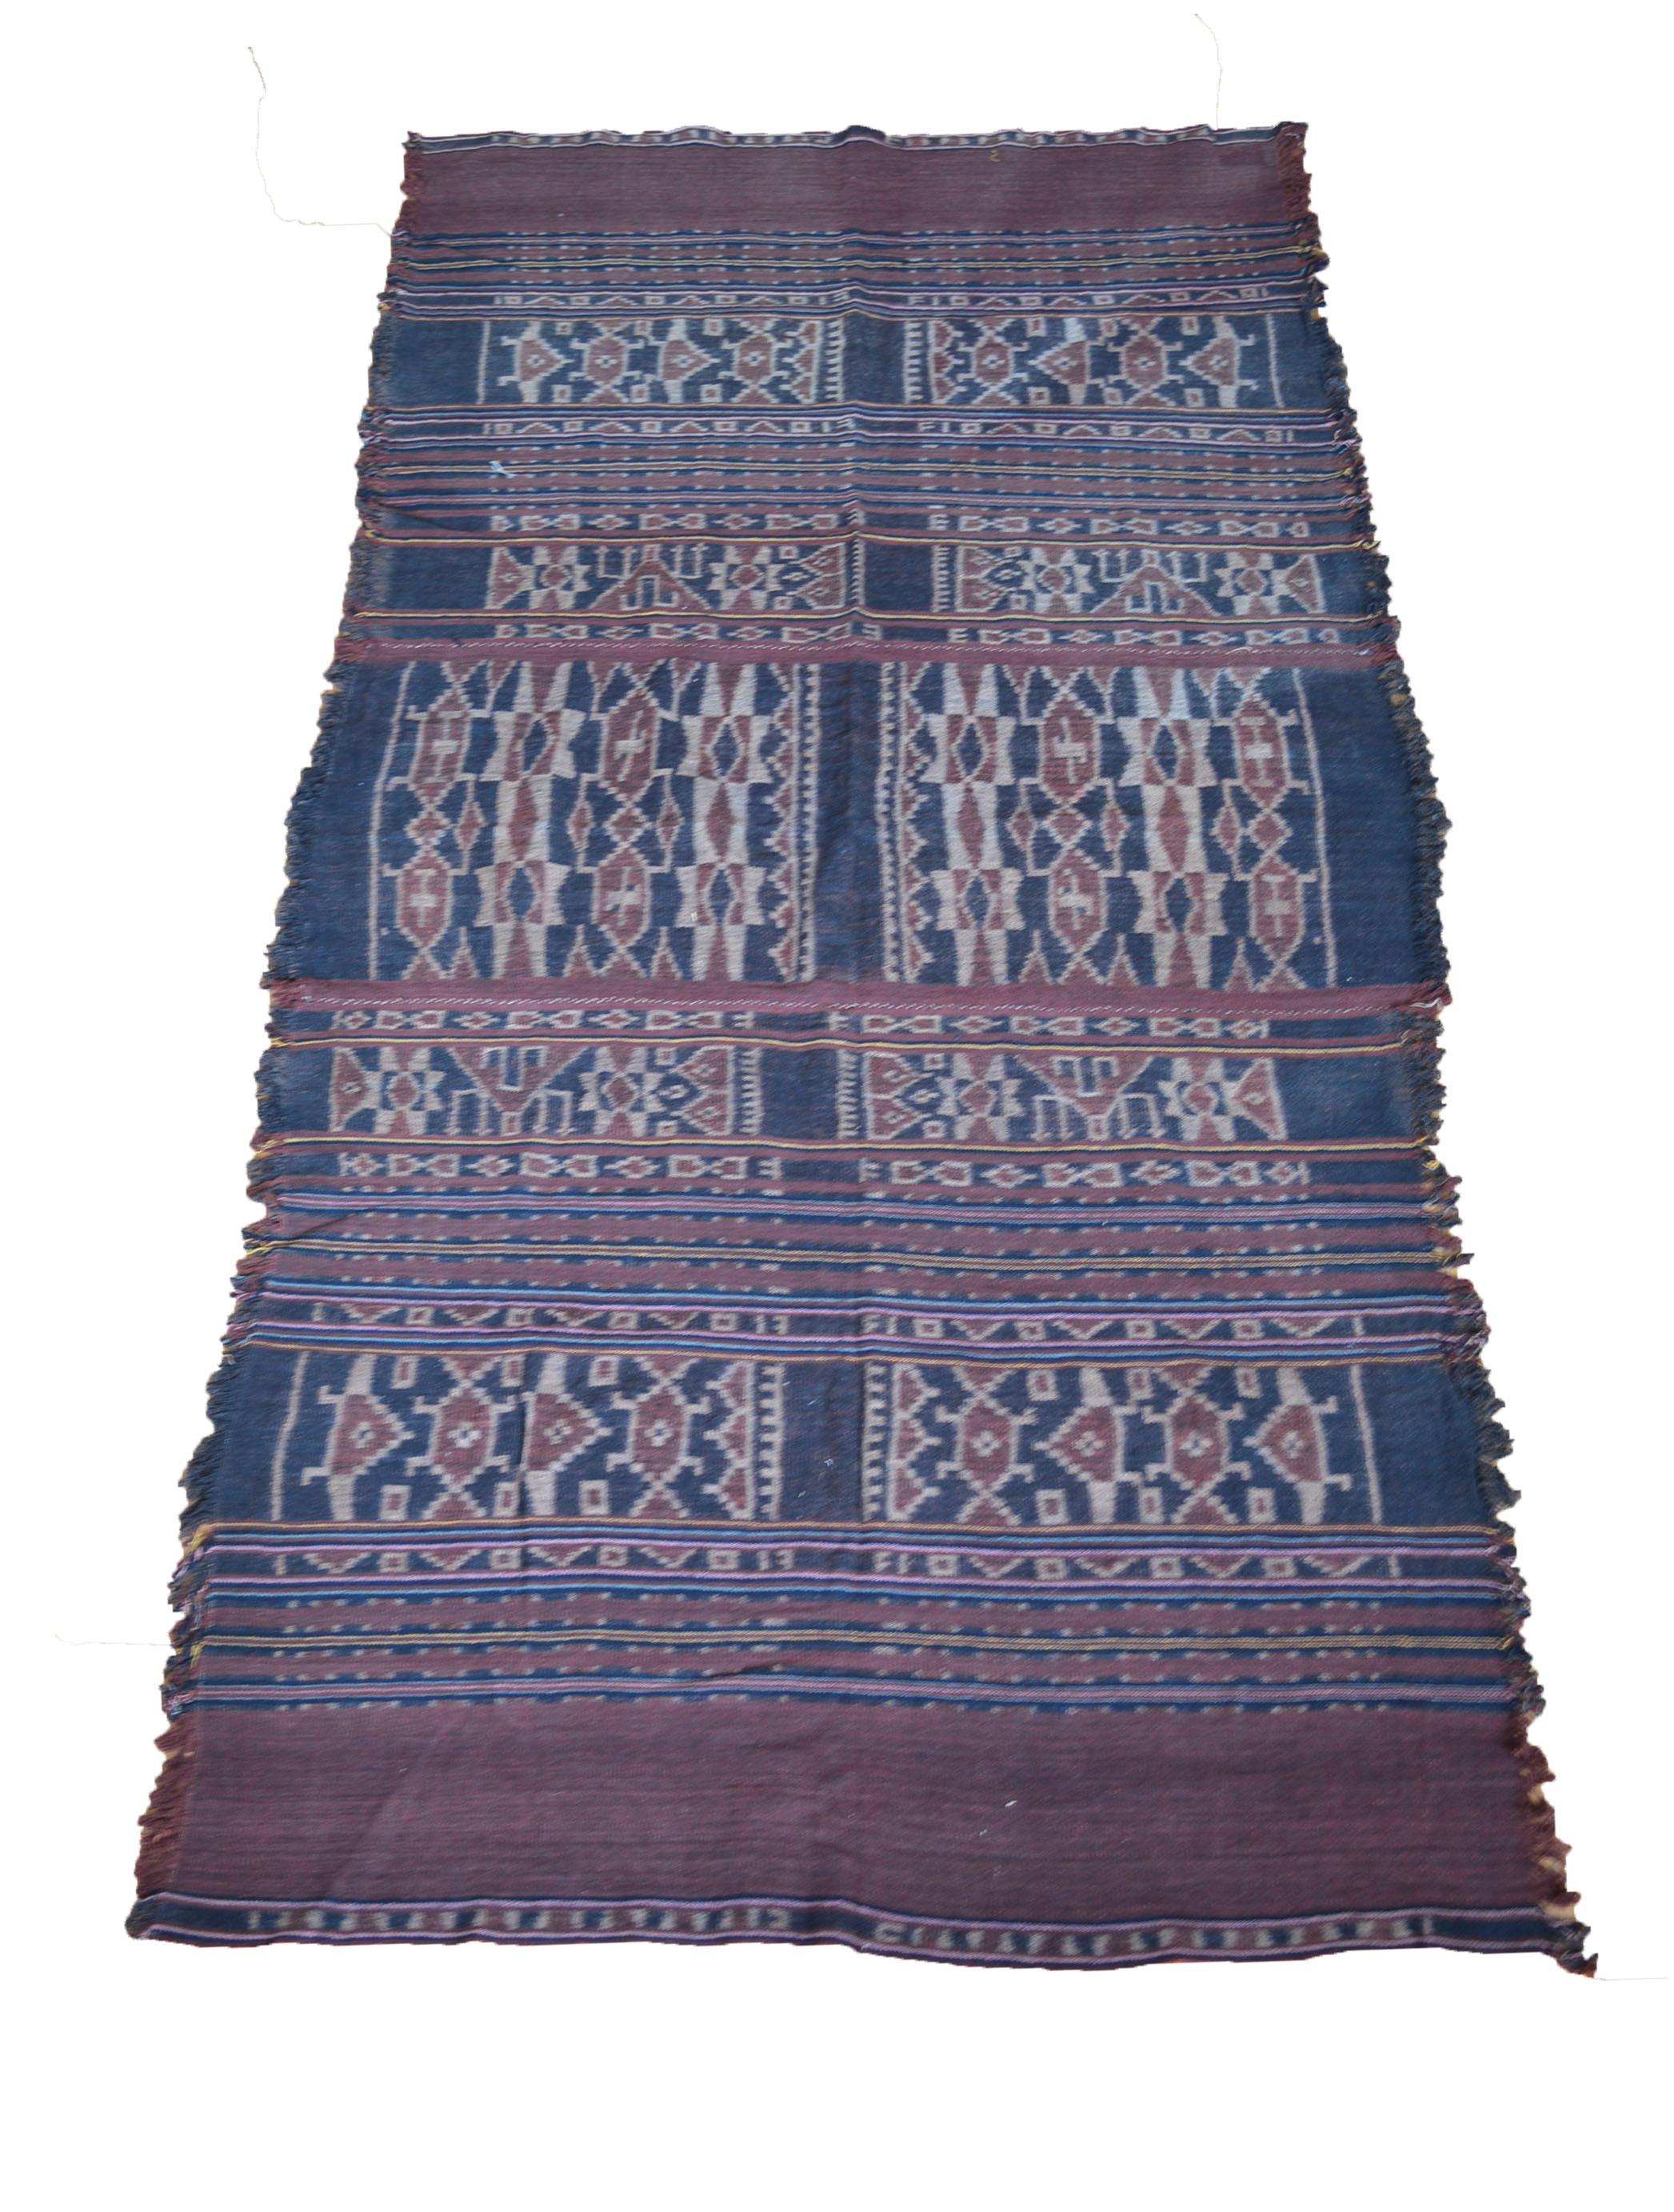 Fine Rare Indonesian antique Ikat cloth from Solor Archipelago, Lembata

This thick woven Ikat cloth is made with hand spun natural dyed cotton yarn woven on island of Solor Archipelago, Lembata
 Indonesia
Made from 3 panels sewn together to form a